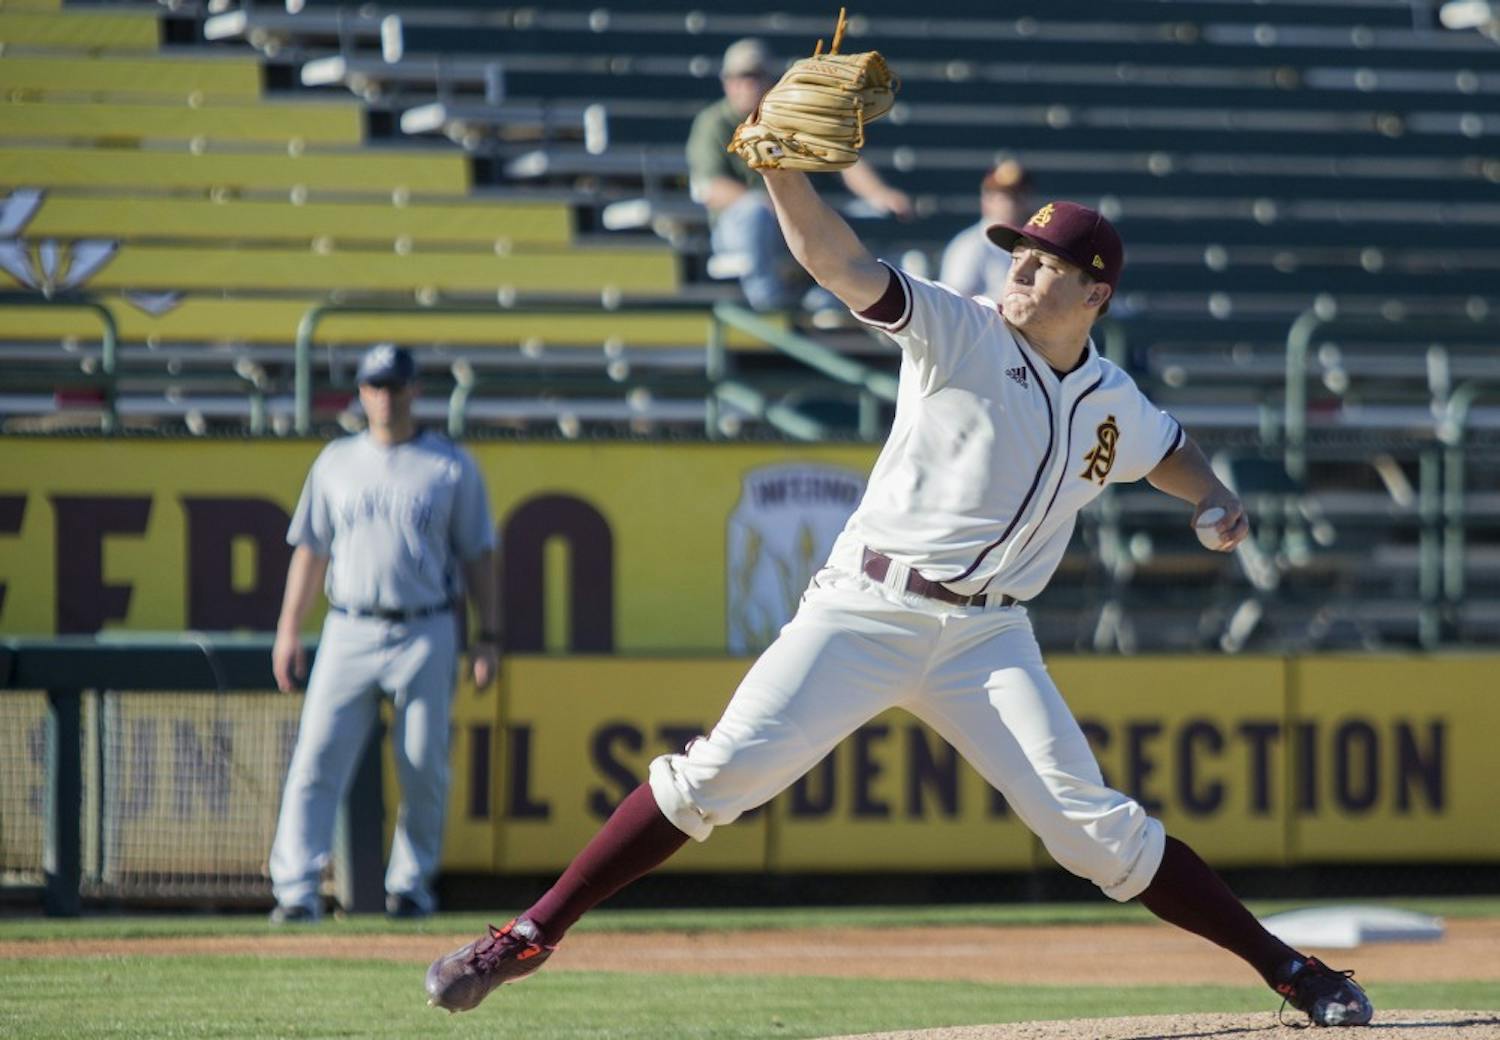 Sophomore pitcher Eli Lingos pitches during the second of two games against Xavier at Phoenix Municipal Stadium on Saturday, Feb. 20, 2016. The Sun Devils won the matchup, 8-2.  